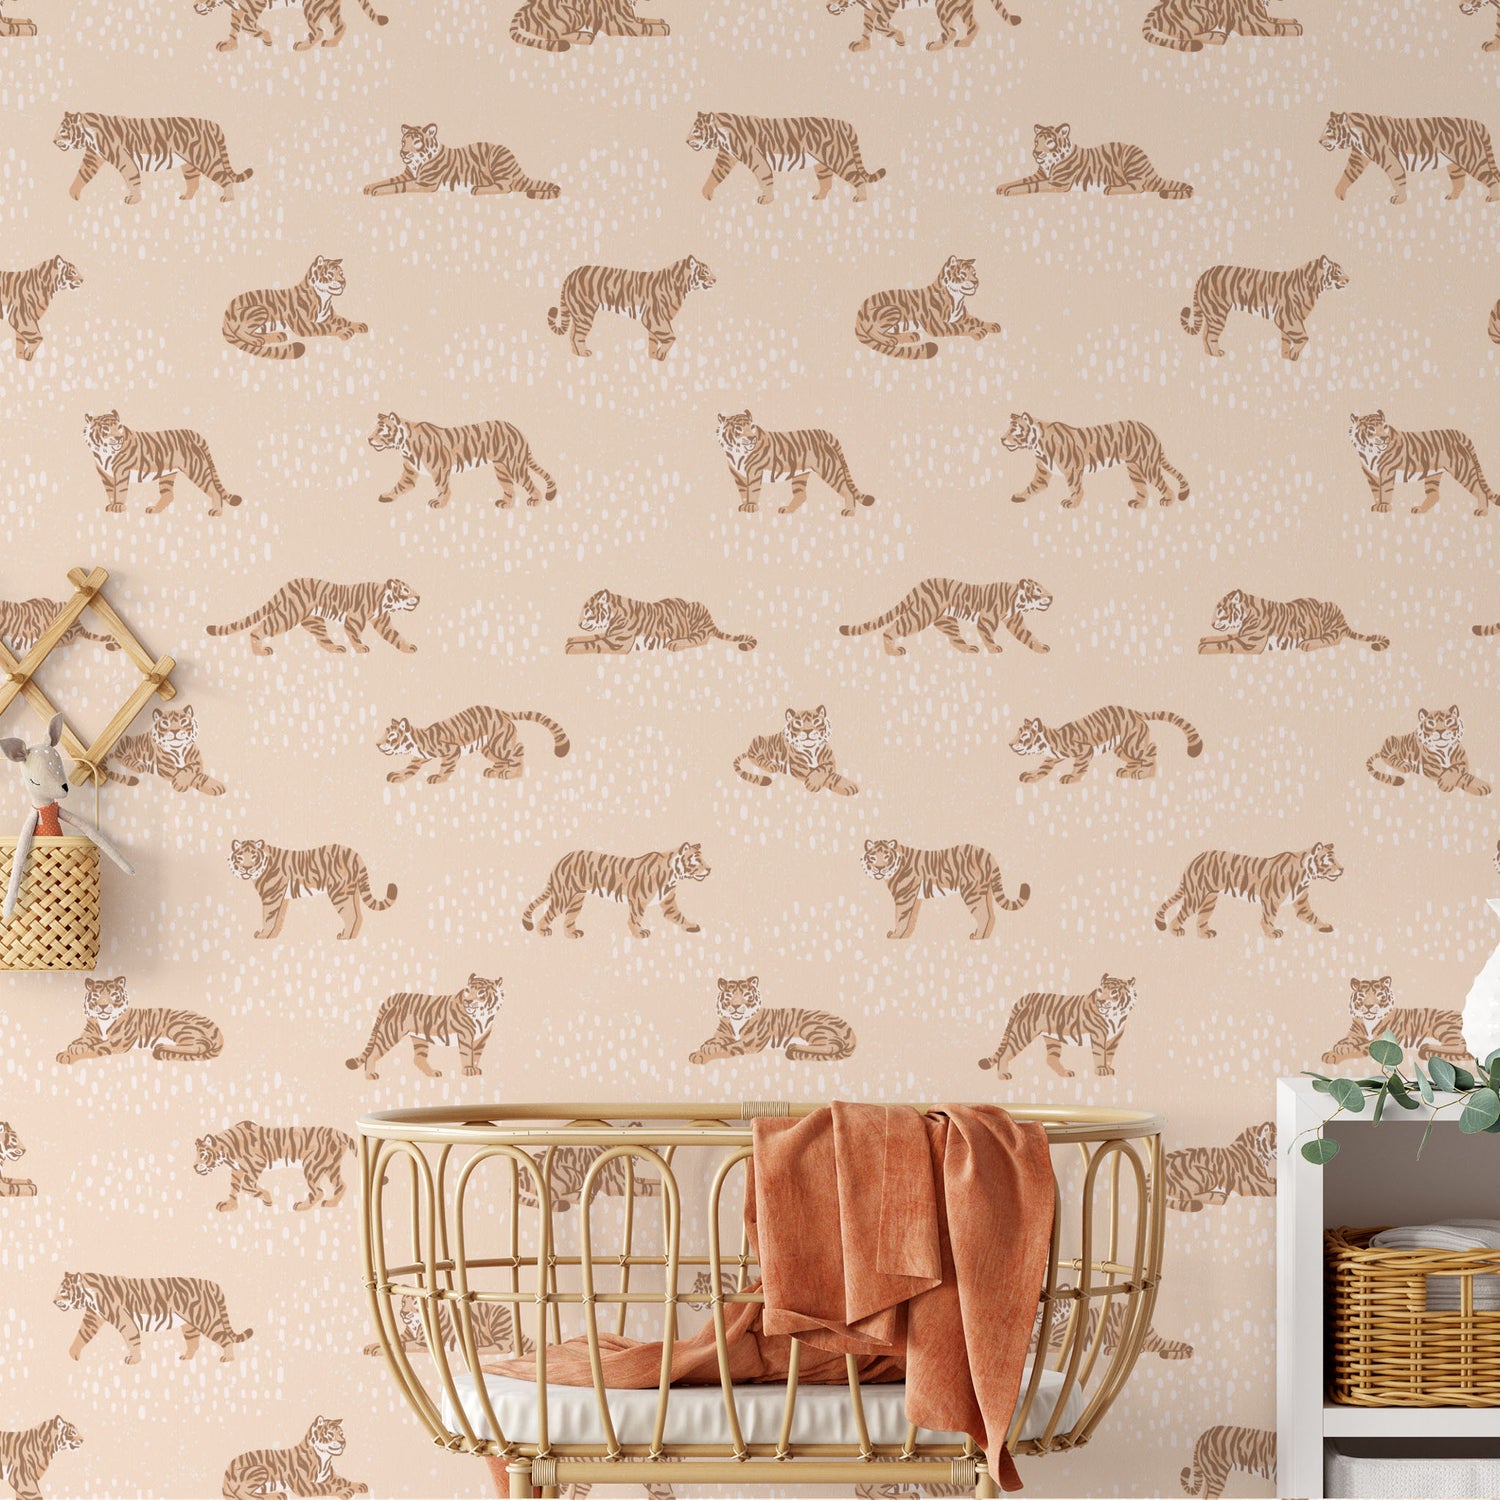 Nursery featuring our Tiger Meadow Wallpaper in Tan by artist Tayler Mitchell for Ayara